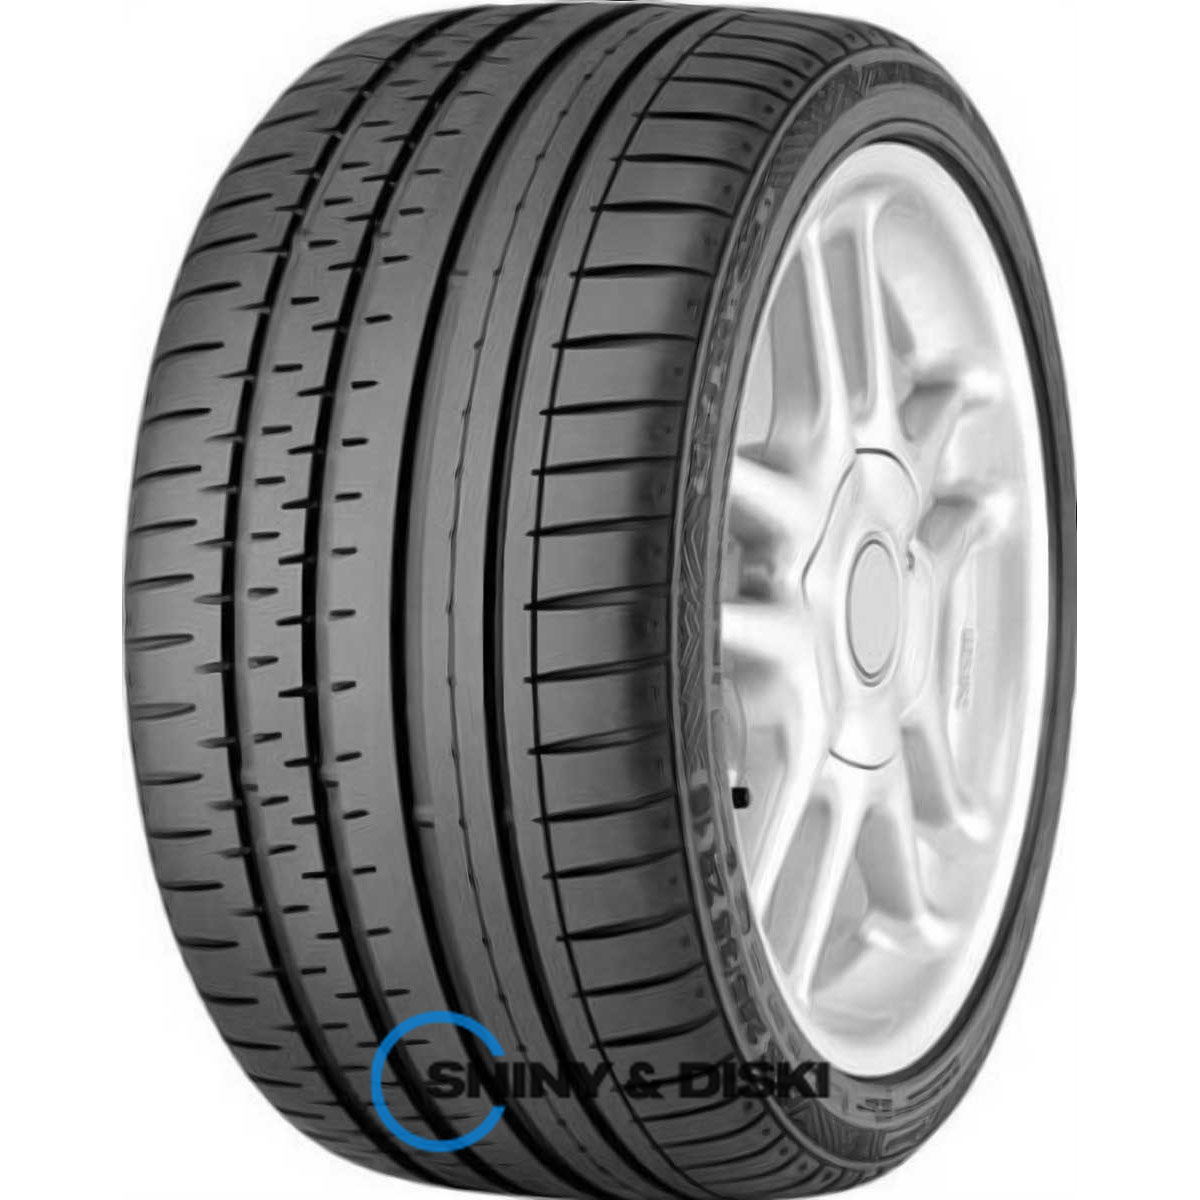 continental sportcontact 2 225/50 r17 98y